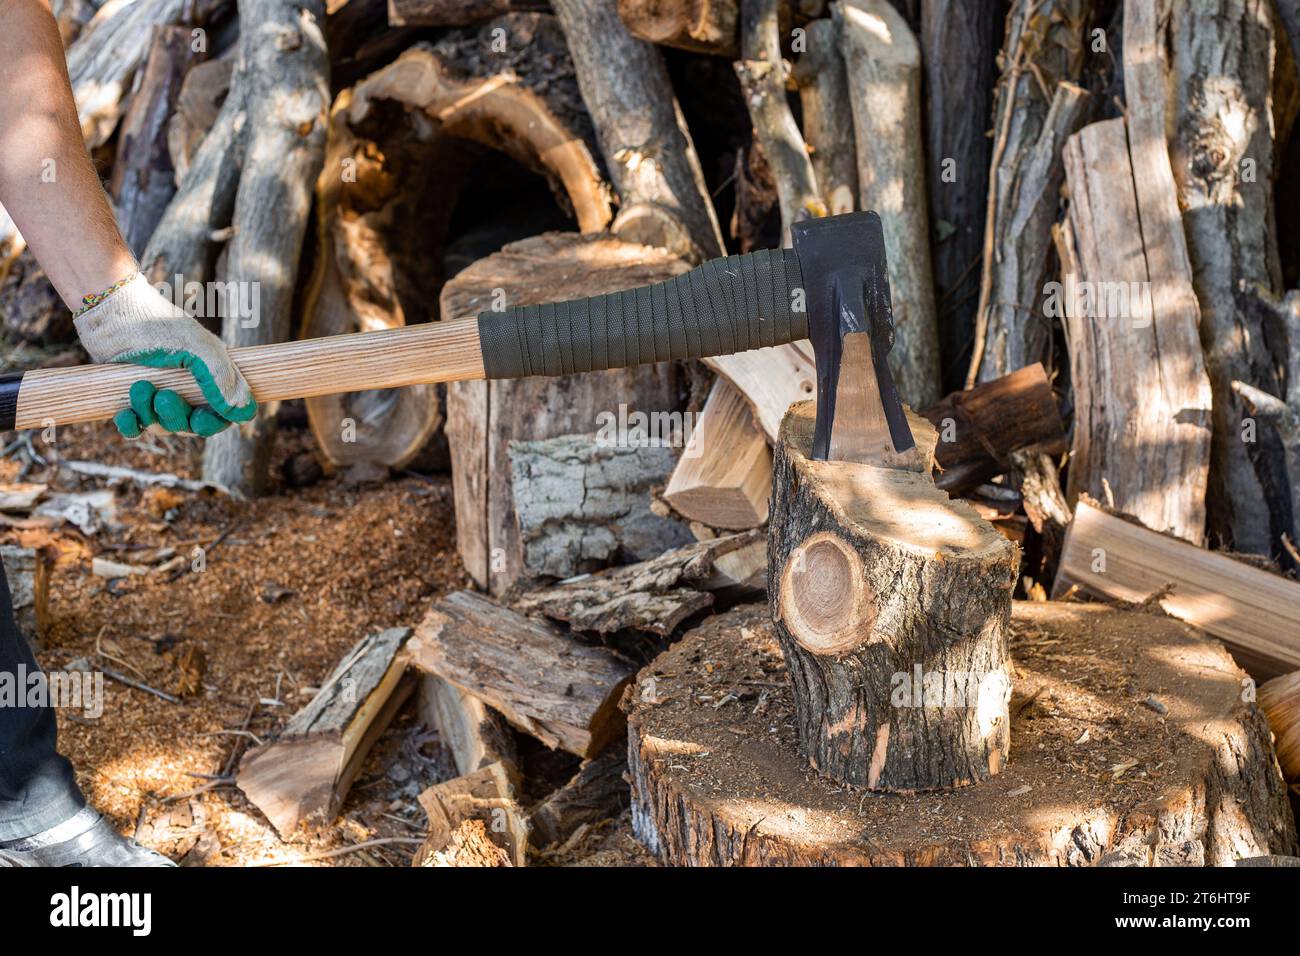 A man chops wood with an ax and cleaver. Preparing fuel for the winter. Stock Photo